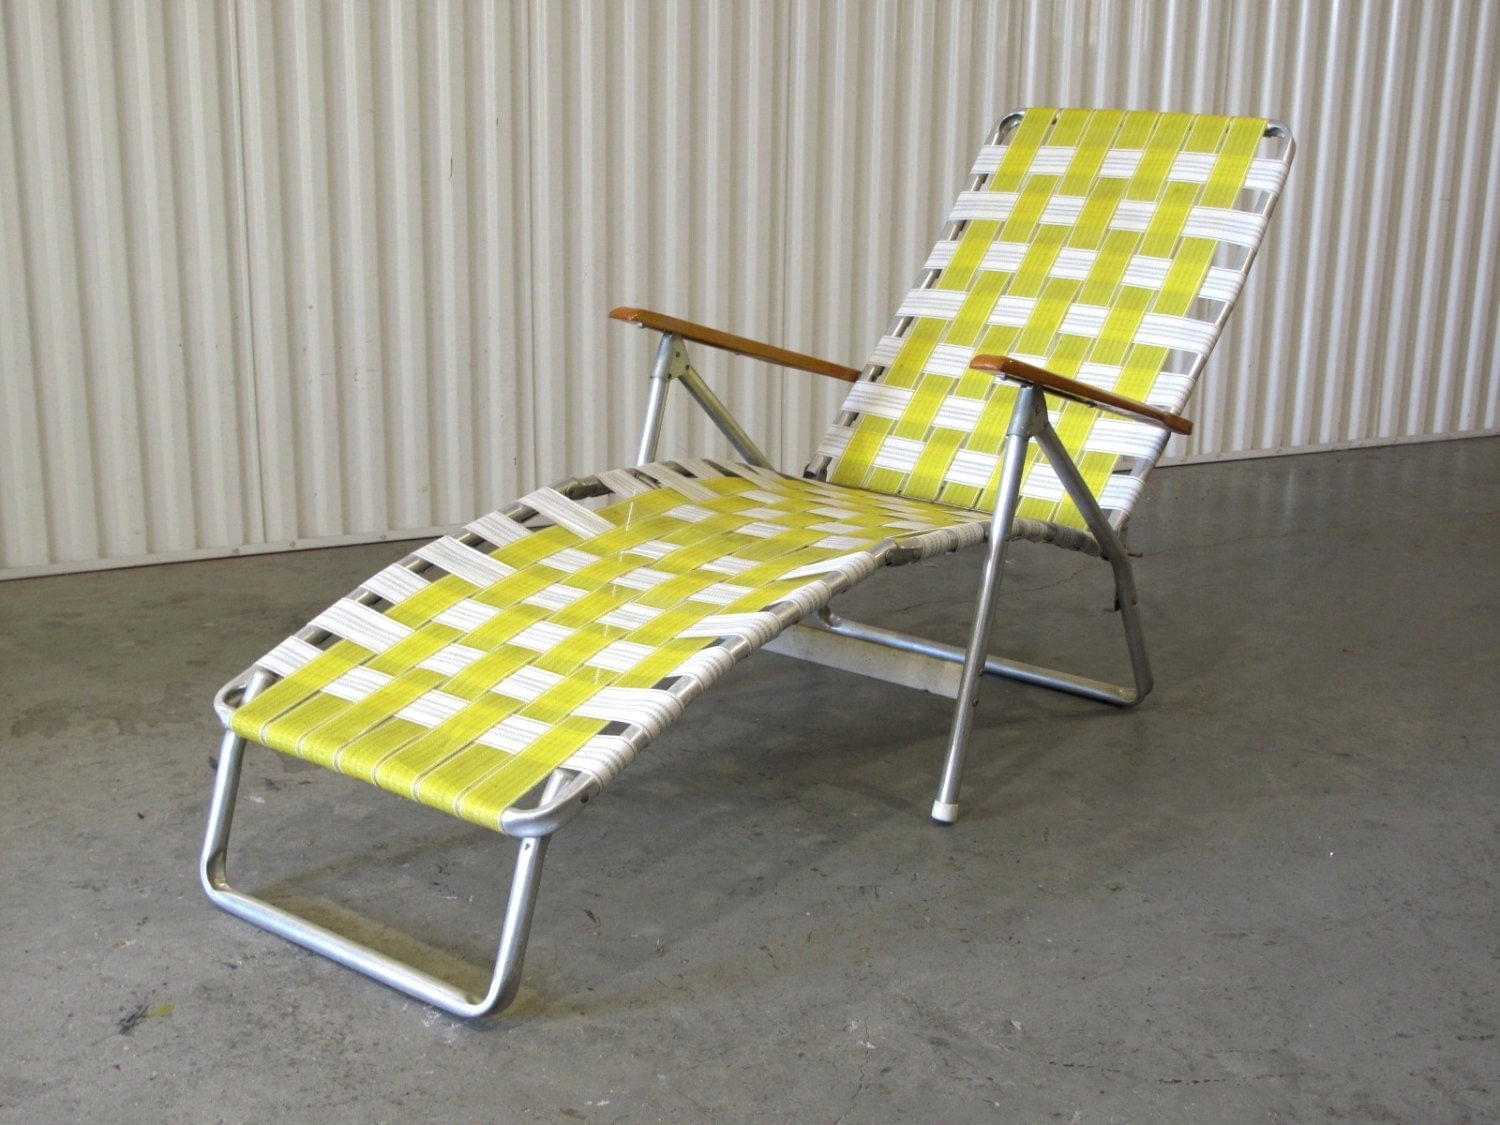  Lawn Chair On Beach with Simple Decor